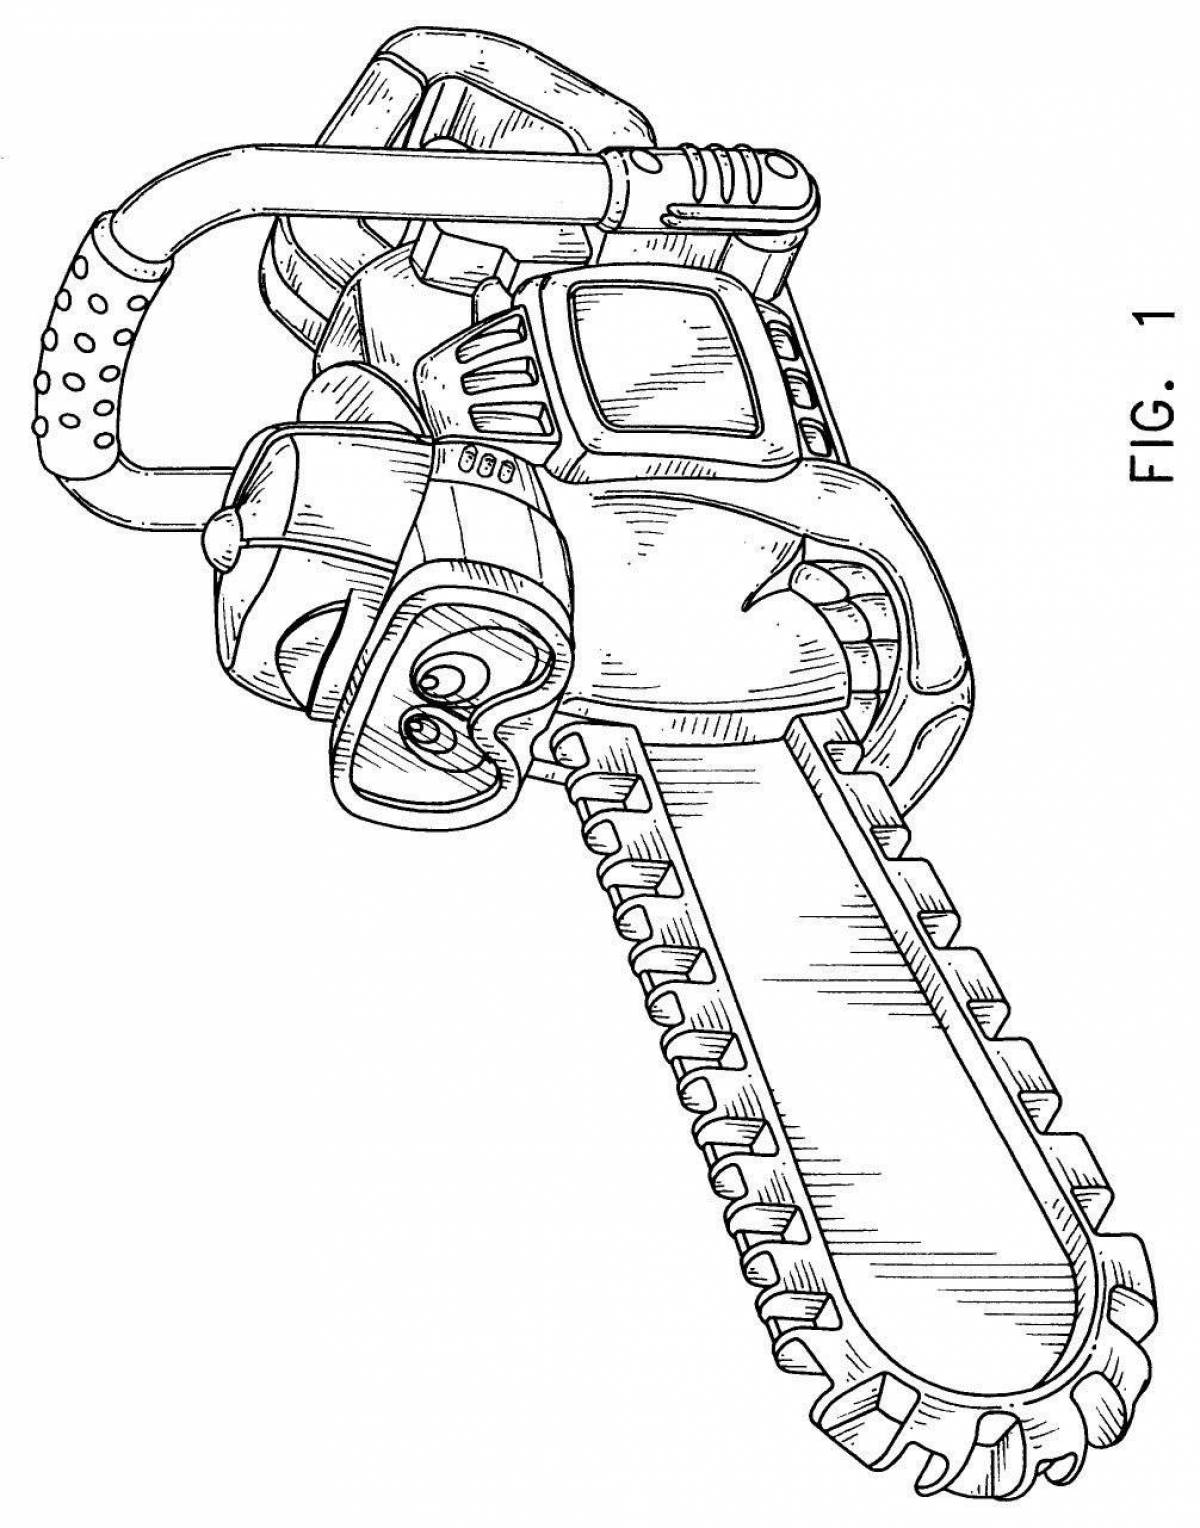 Intricate coloring page of a man with a chainsaw